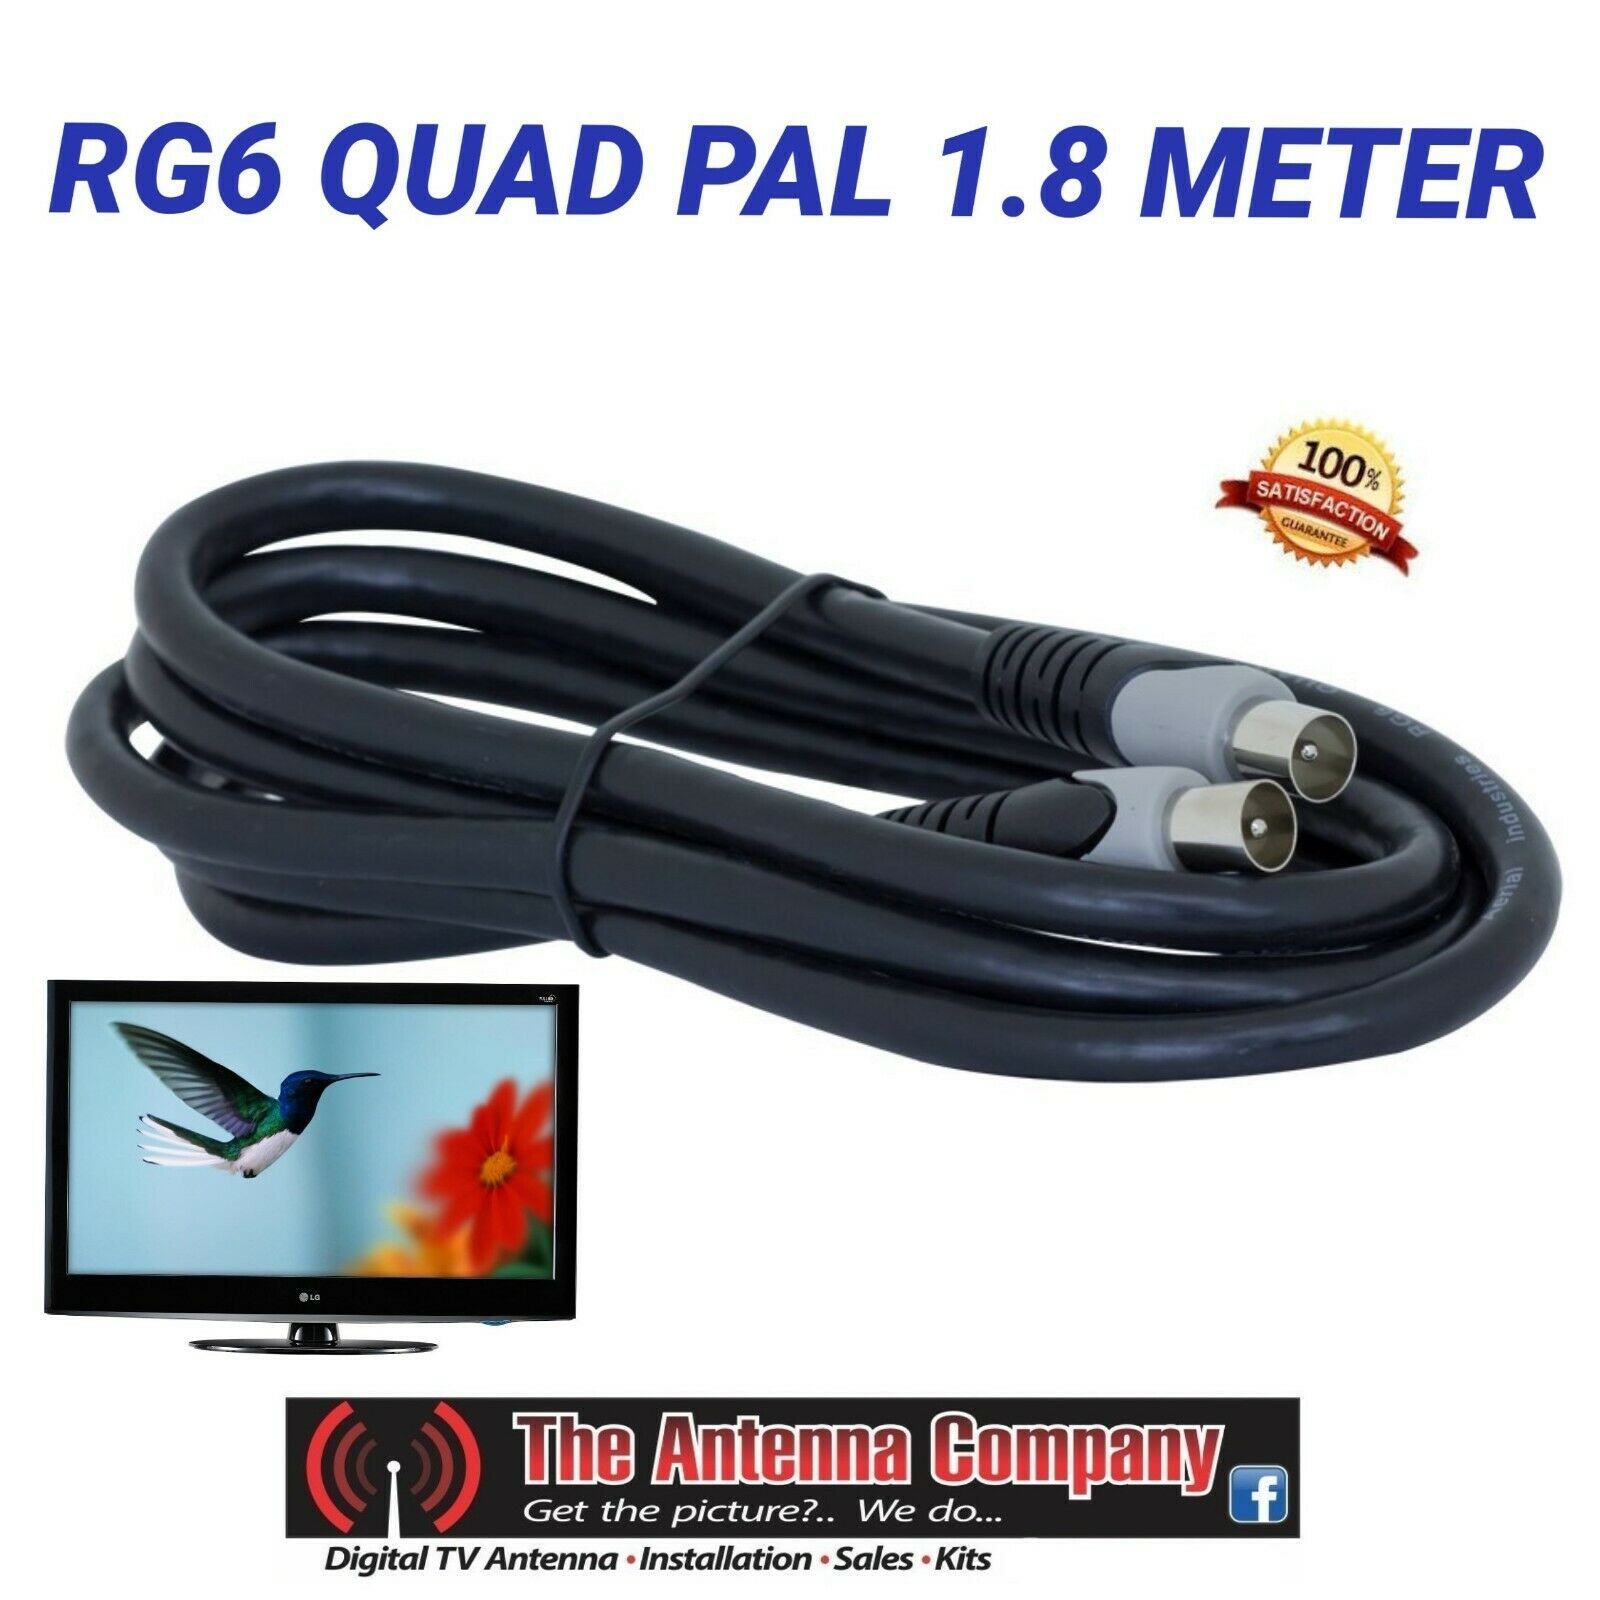 Tv Antenna Cable Lead Rg6 Quad Shield Quality 1 8 Meter Pal To Pal Black Dtv The Antenna Company